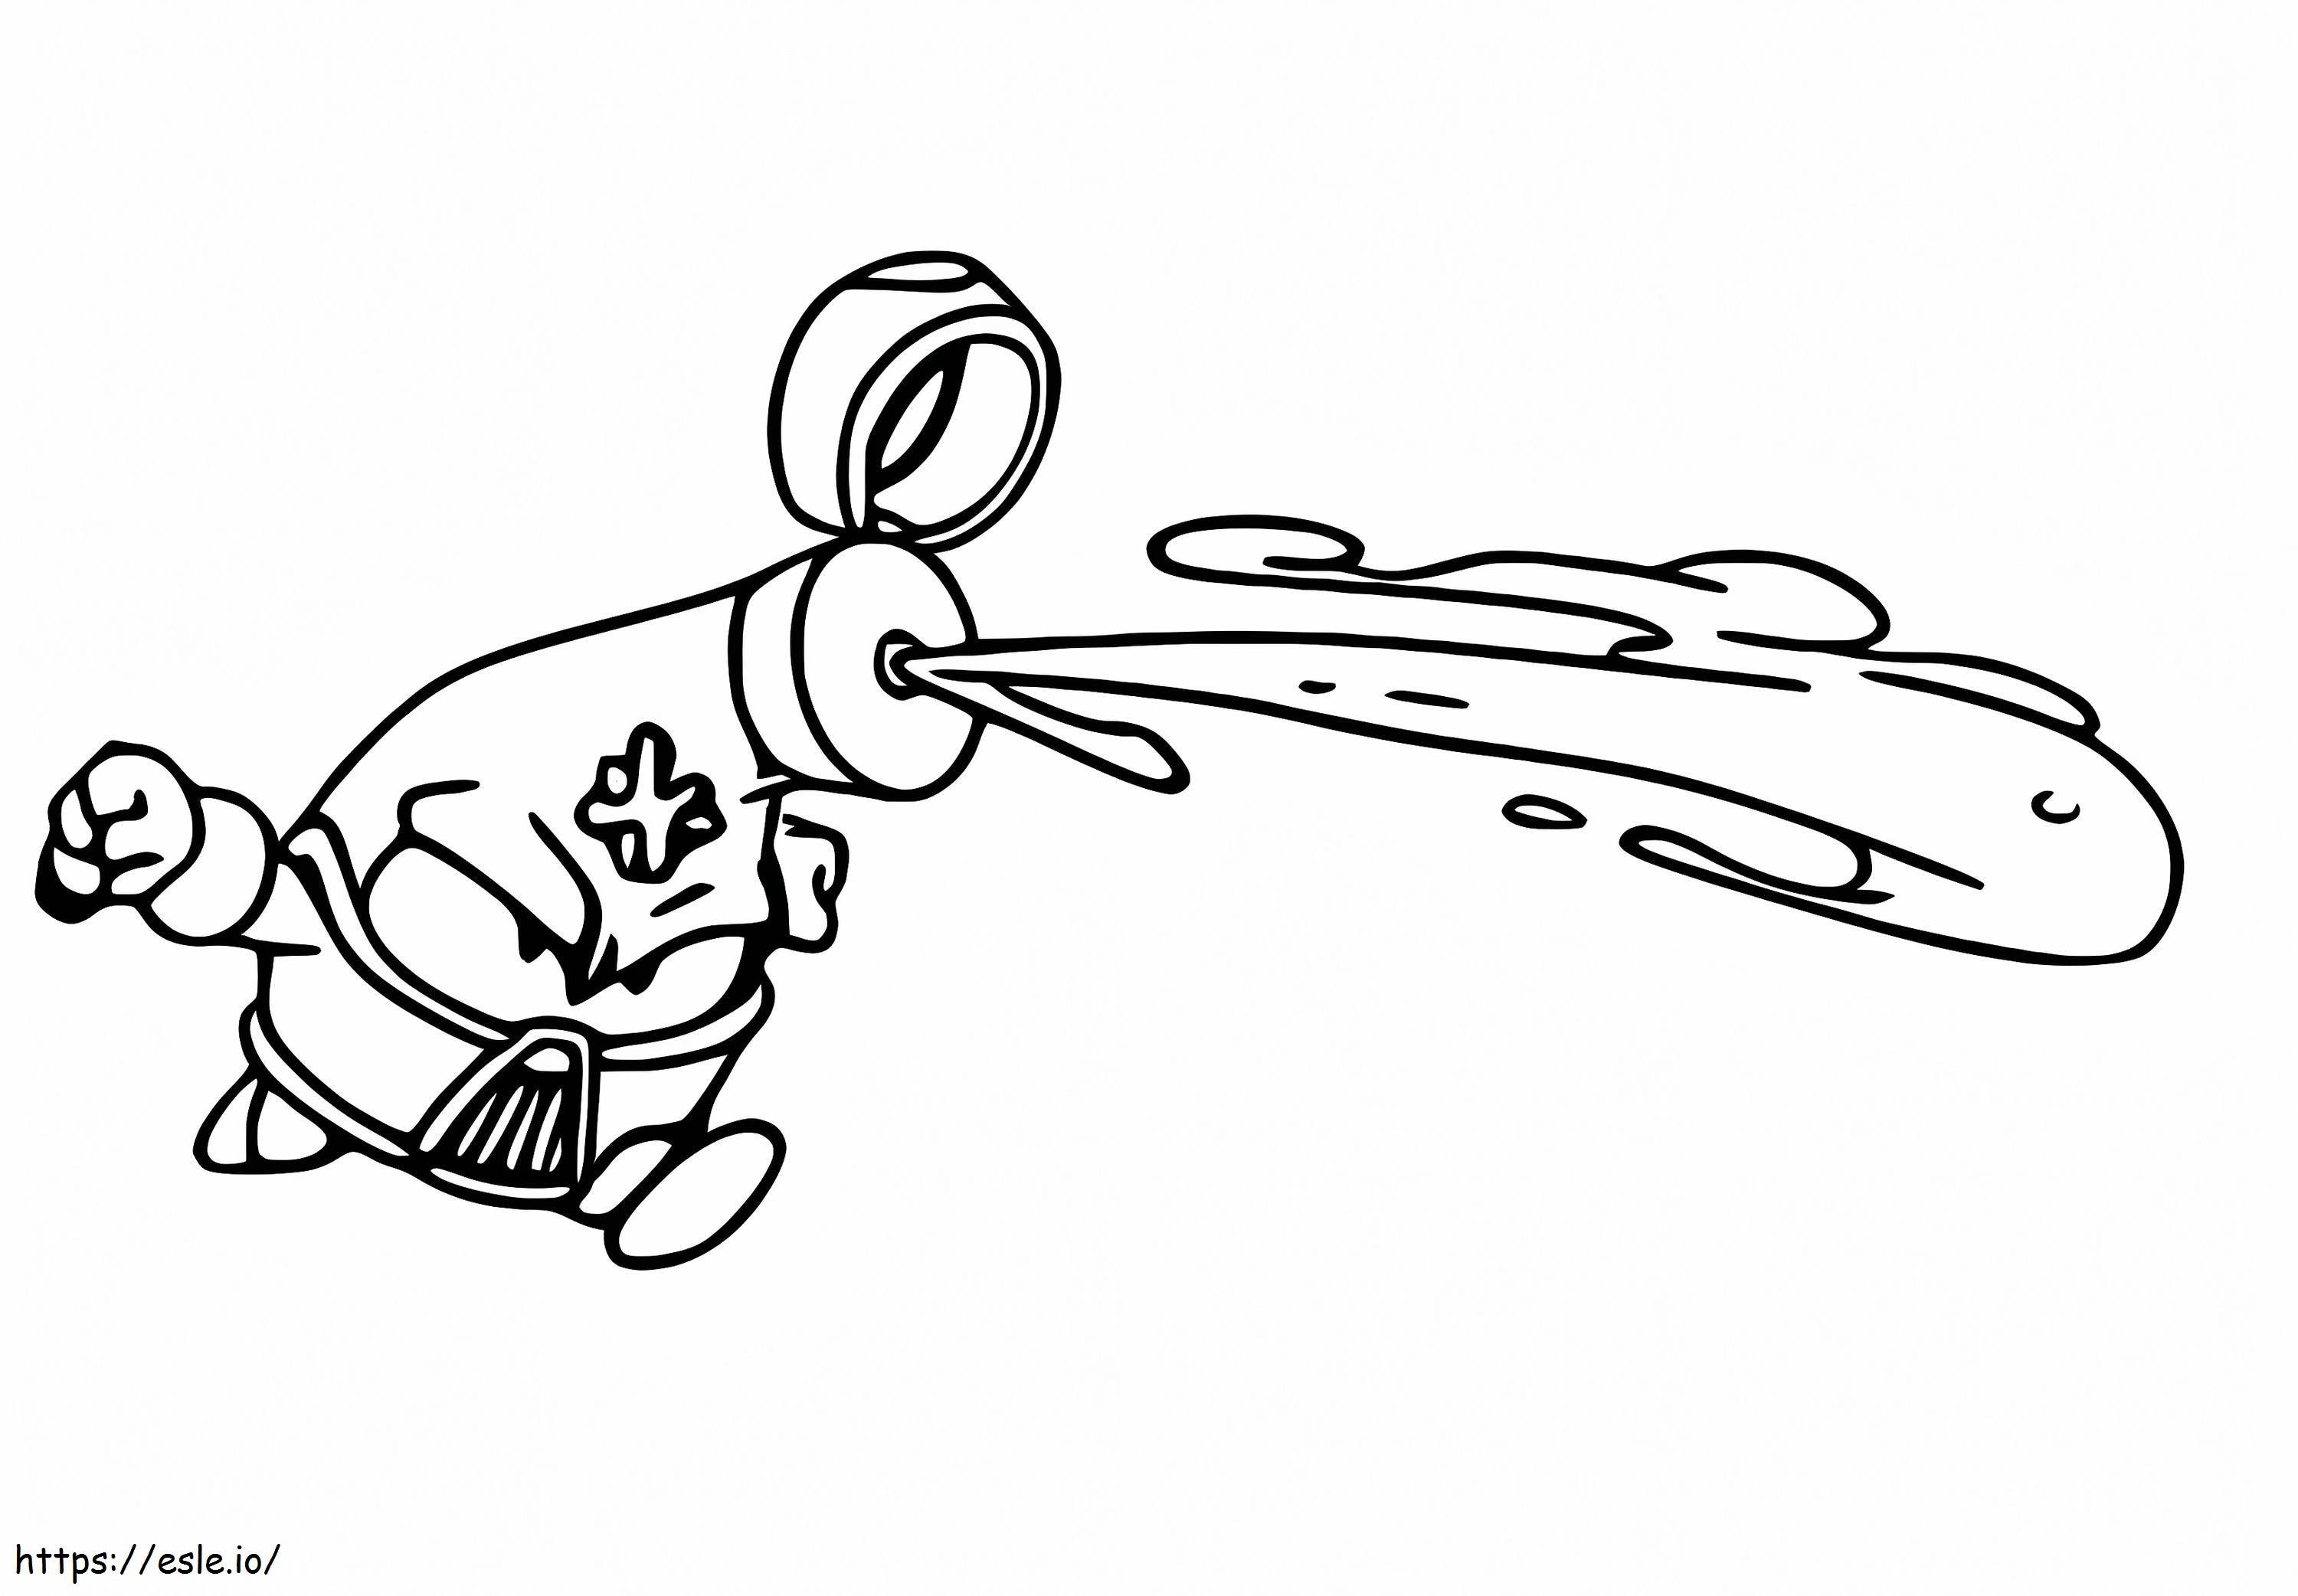 Red Ray Superzings coloring page